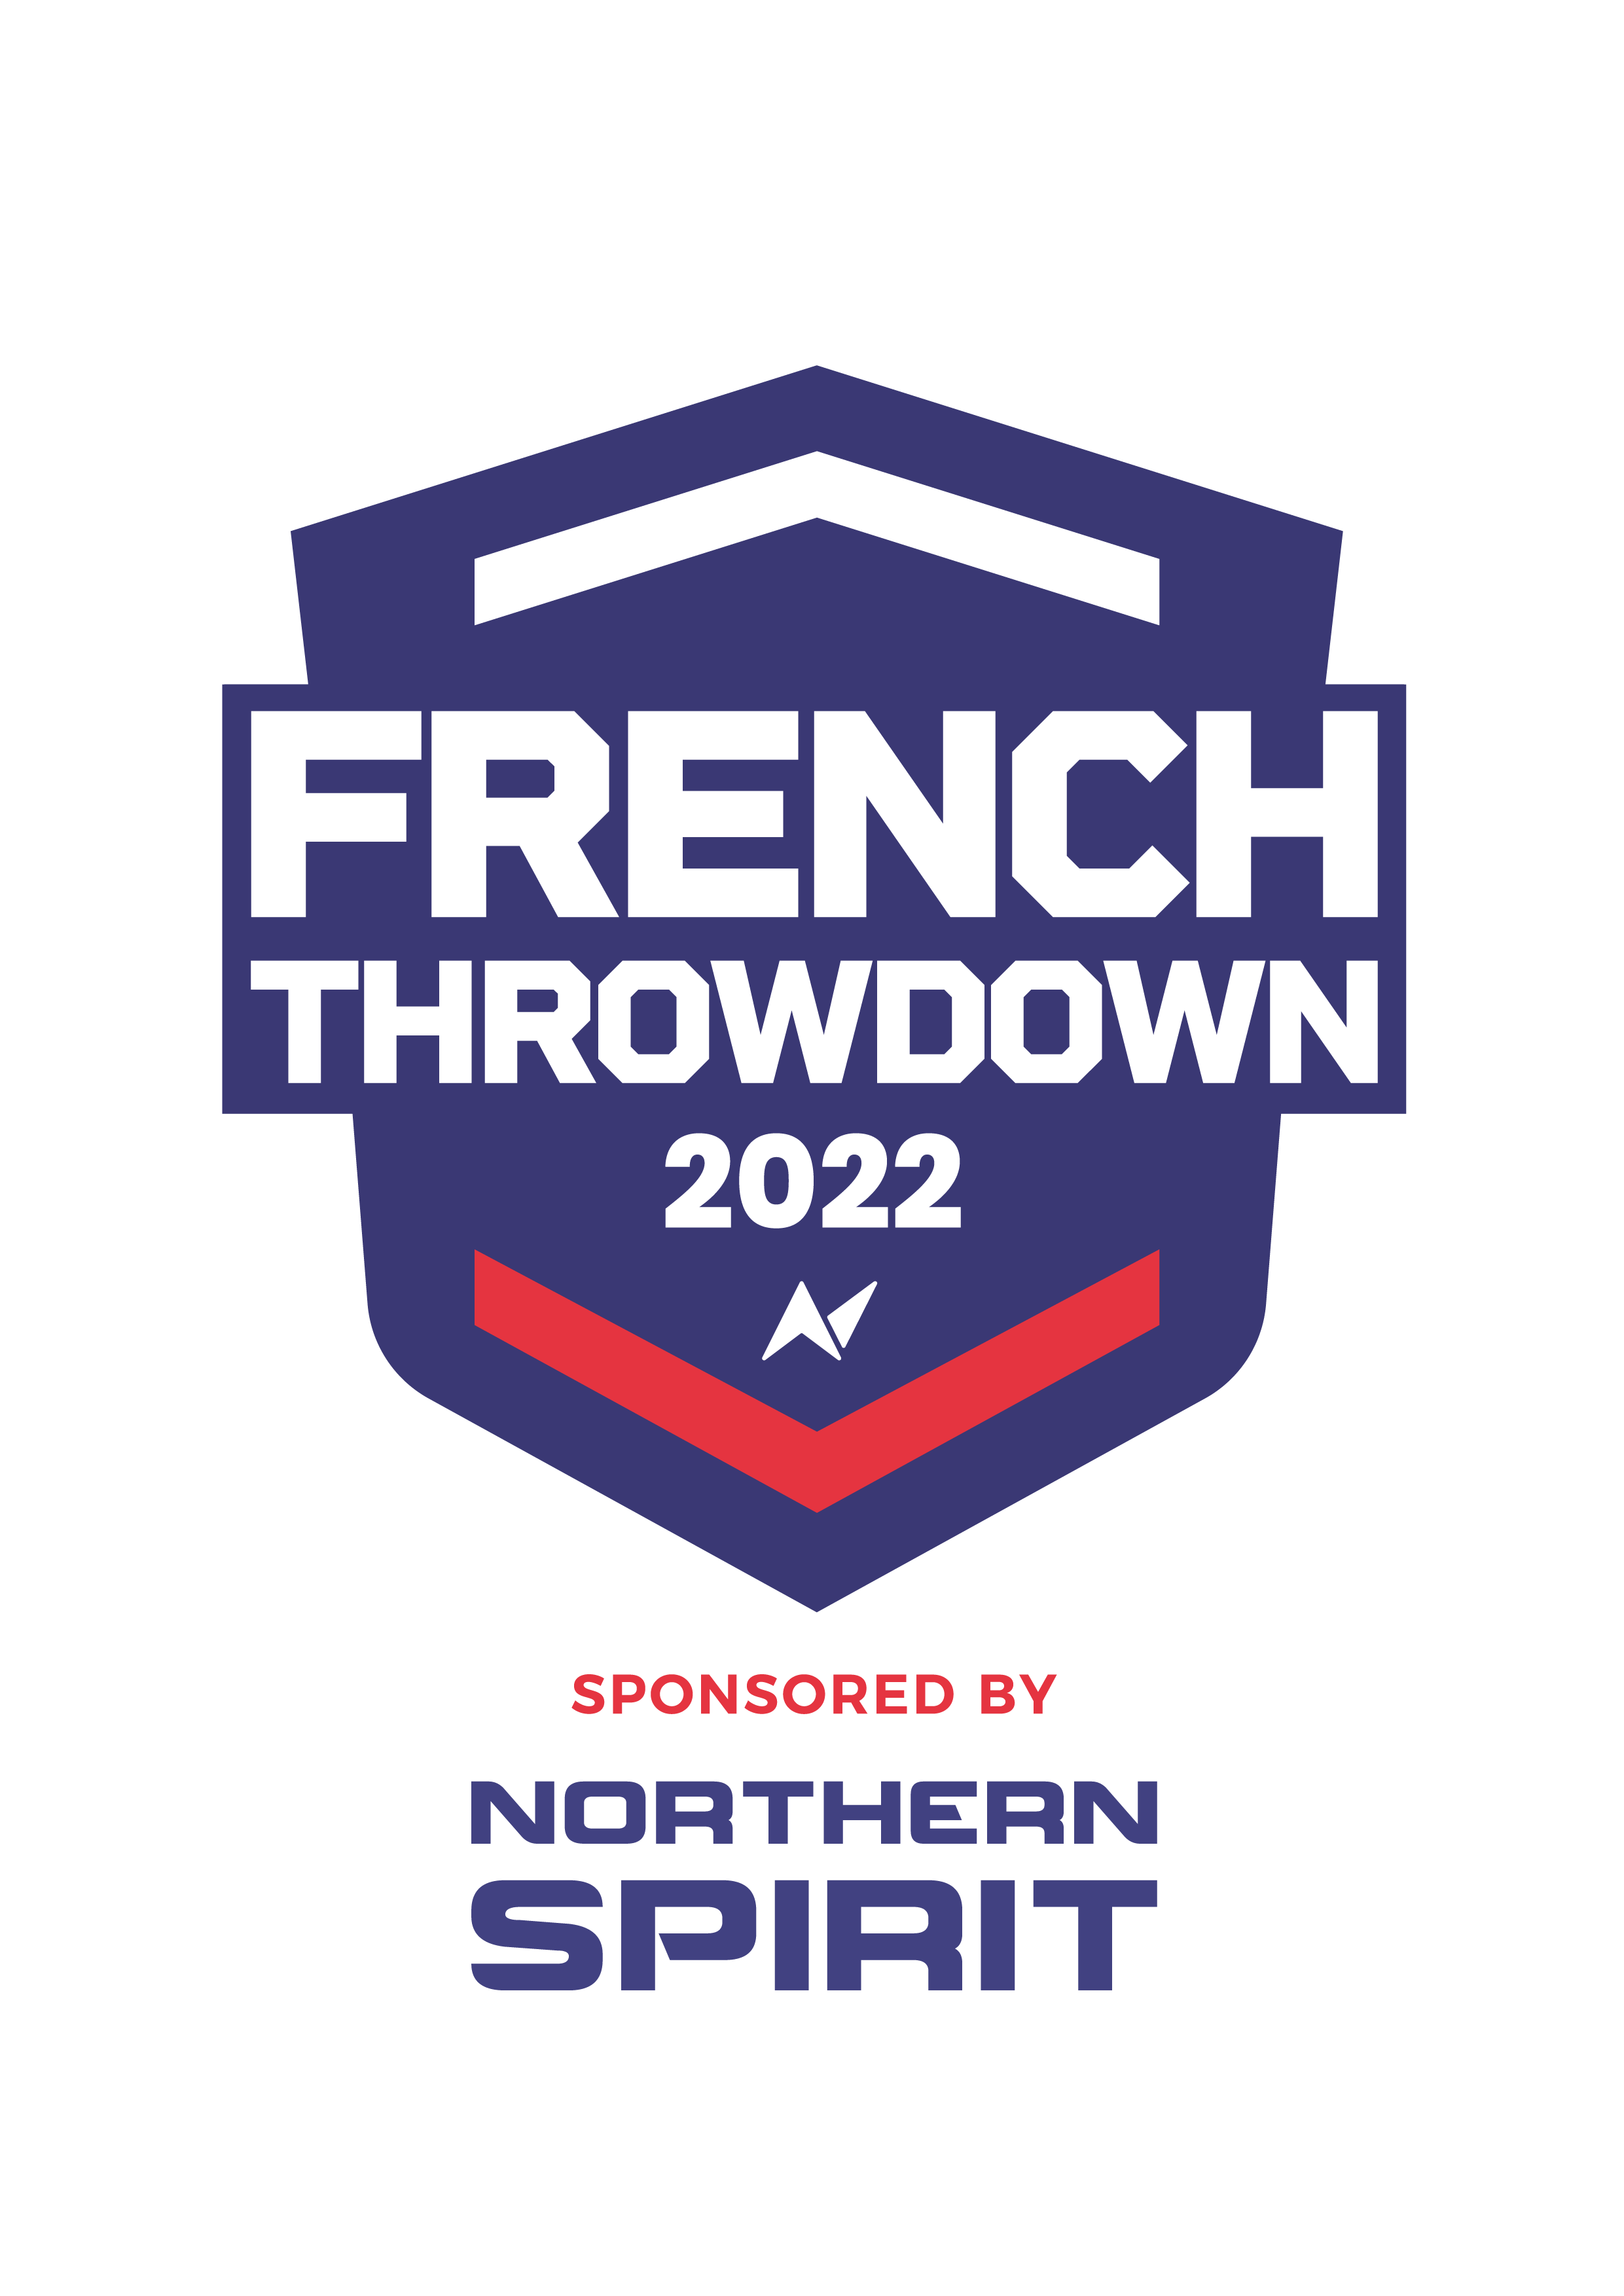 Sign up for the French Throwdown